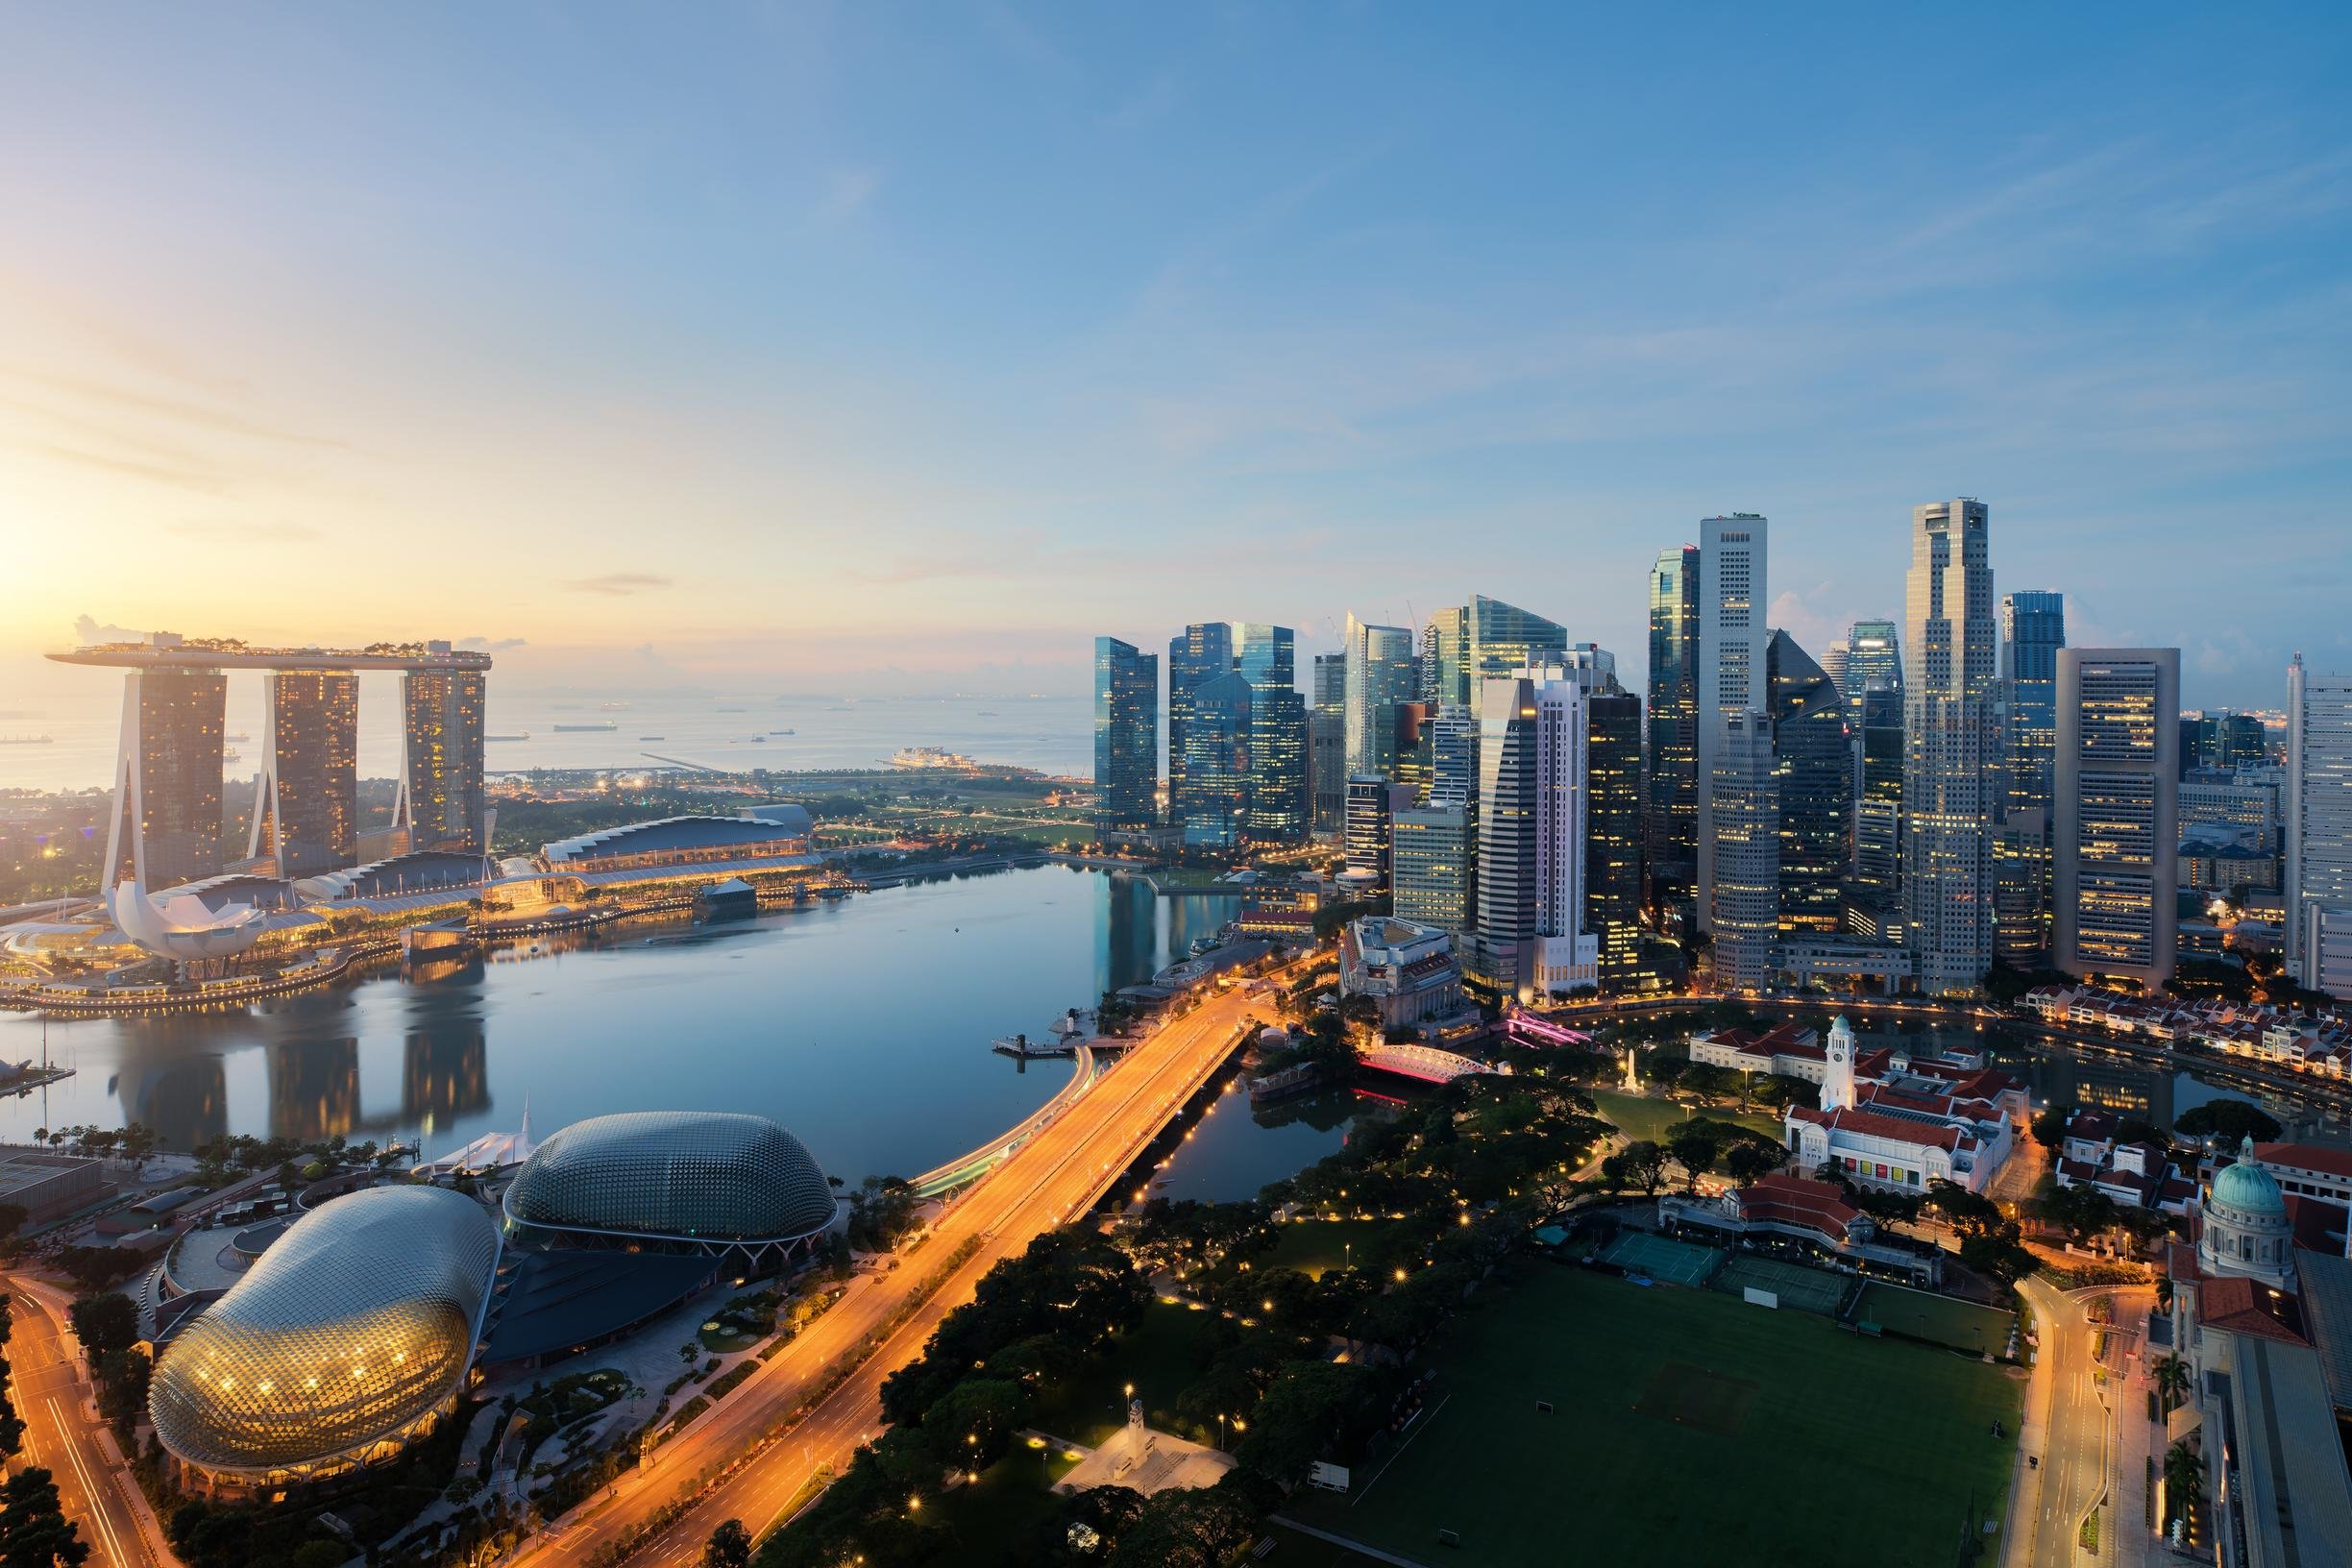 Aerial view of Singapore business district and city at twilight.